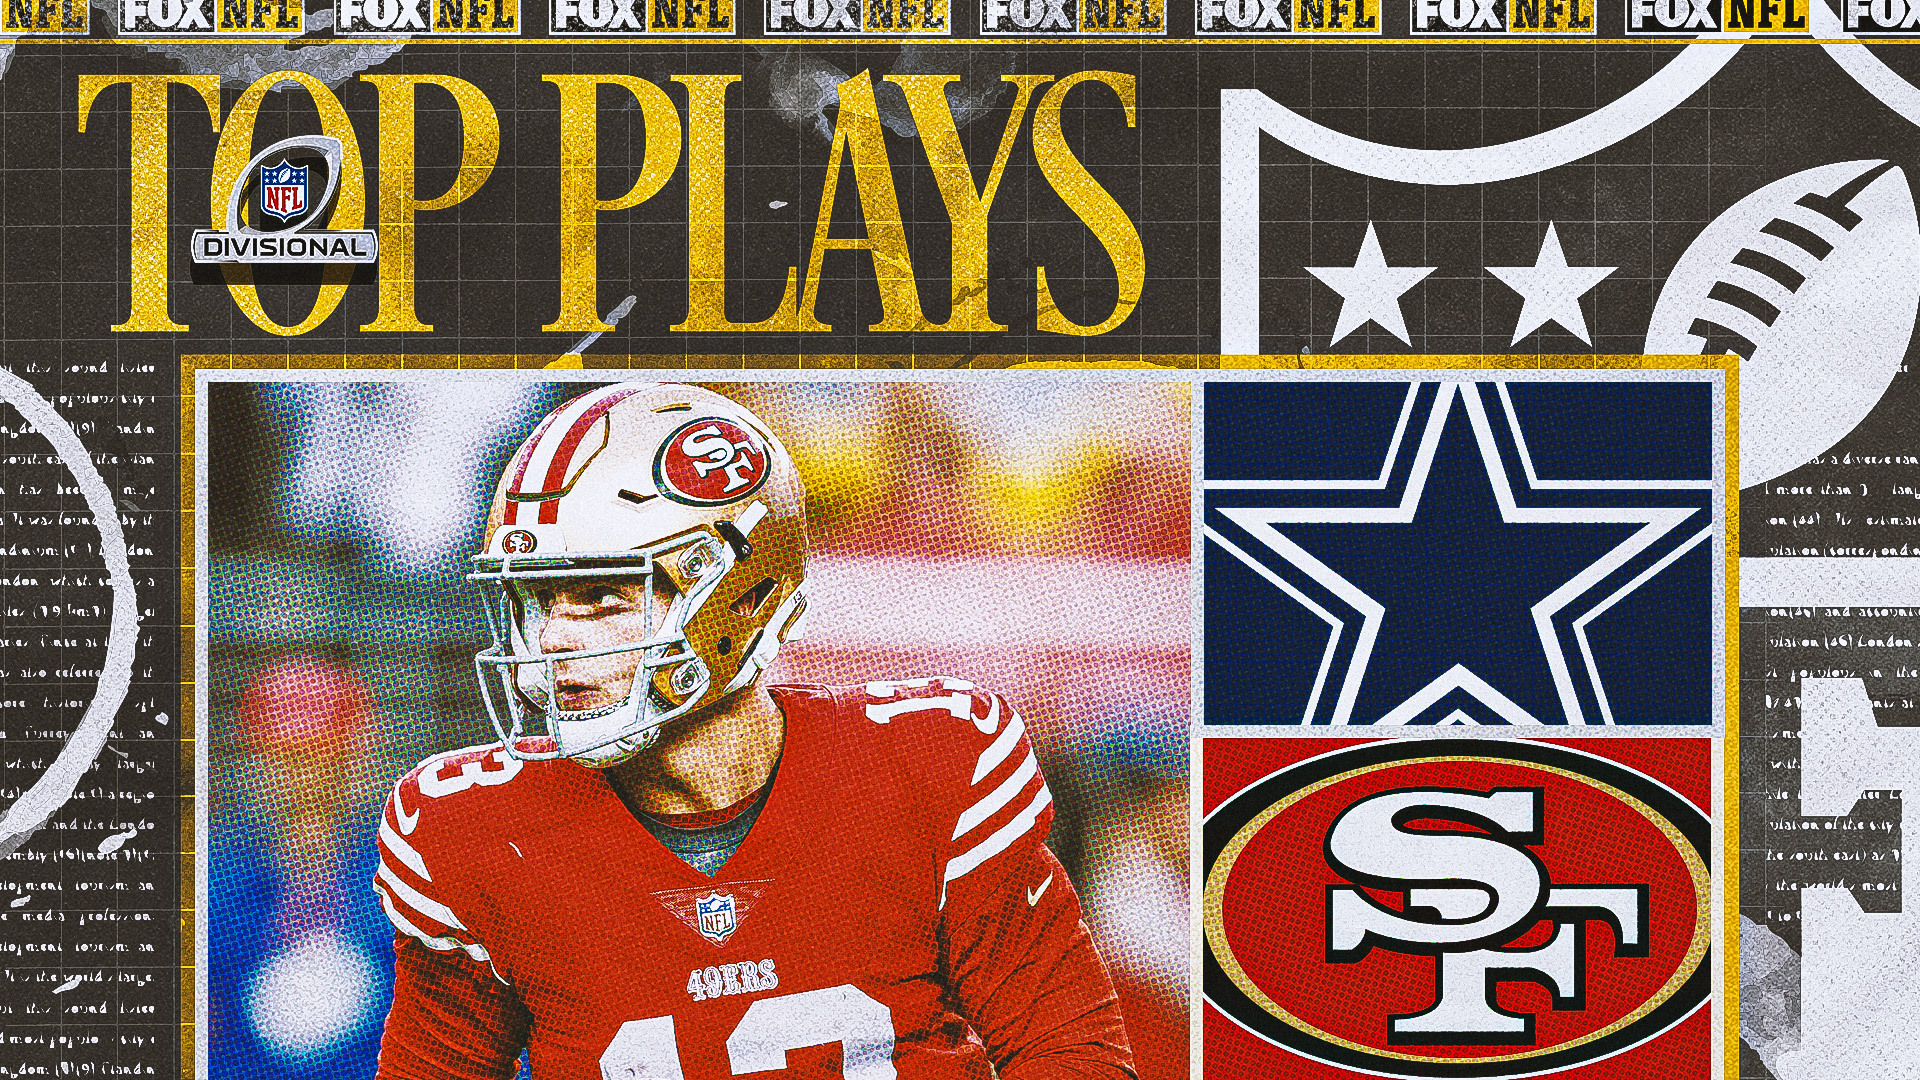 Cowboys vs. 49ers highlights: San Francisco outlasts Dallas in divisional round